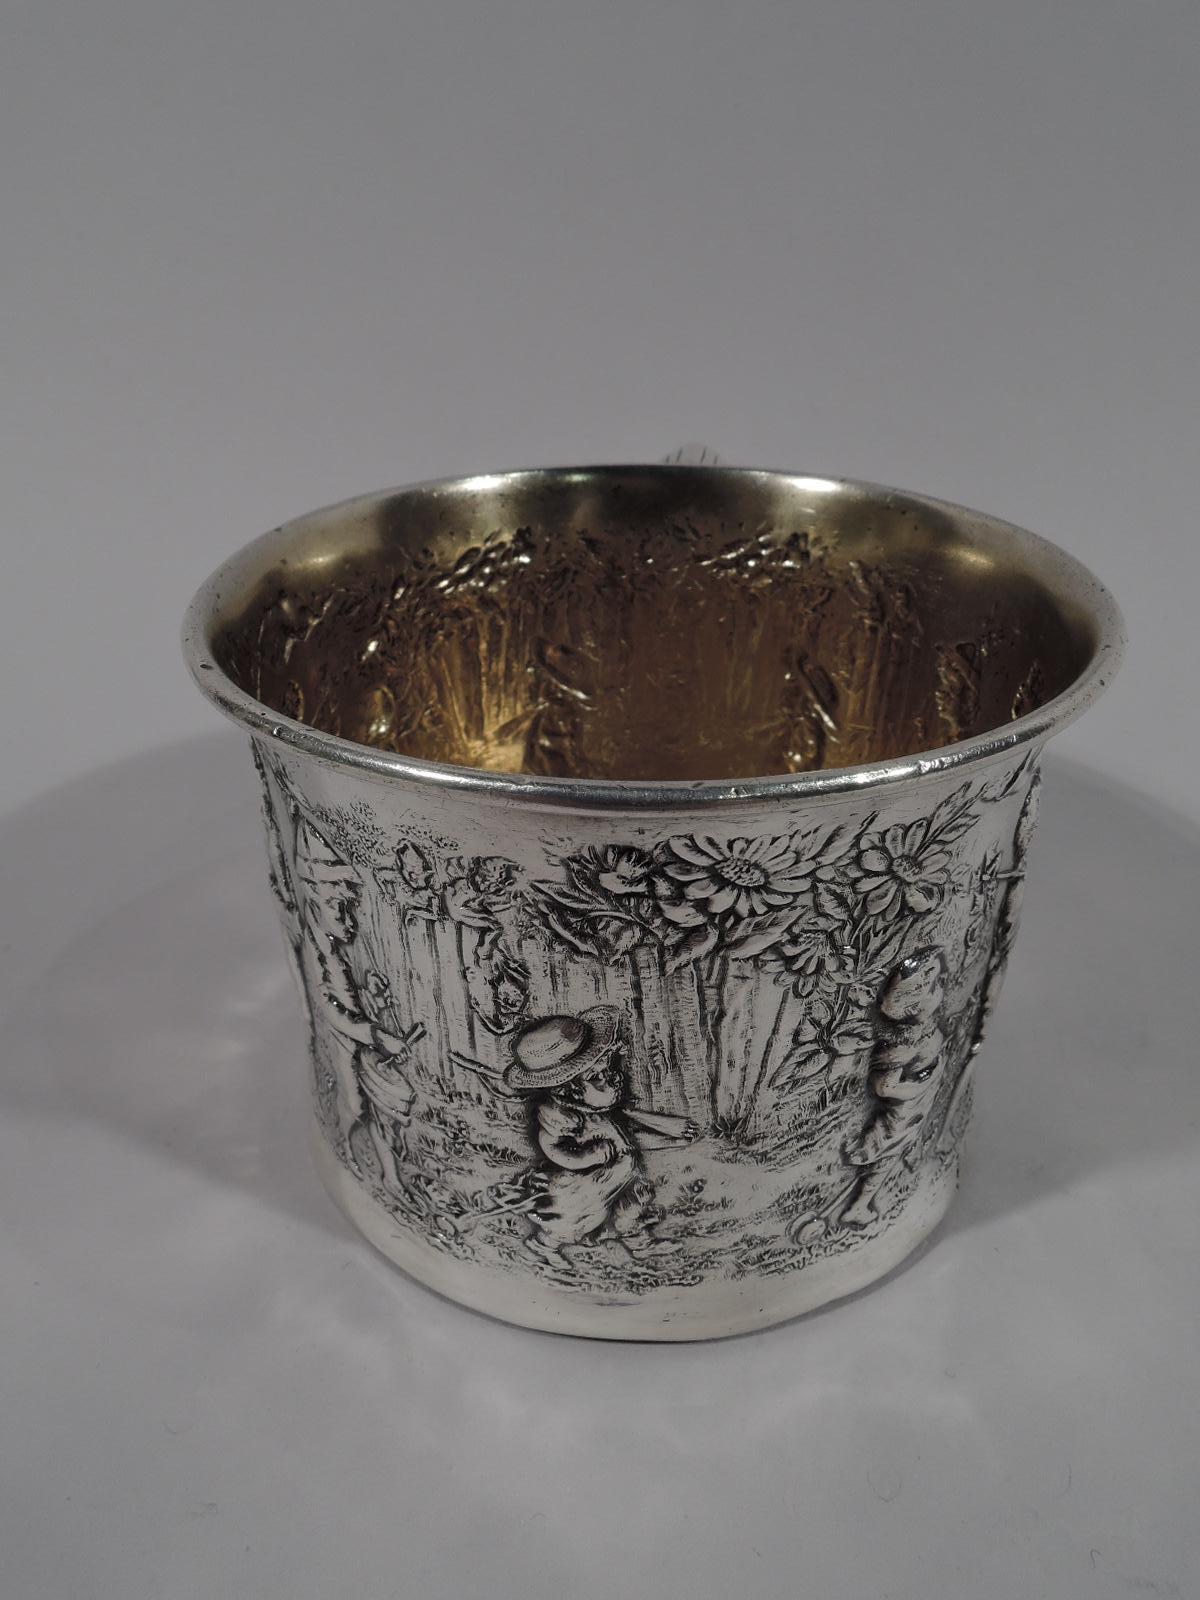 American Antique Gorham Edwardian Sterling Silver Boy’s Expedition Baby Cup